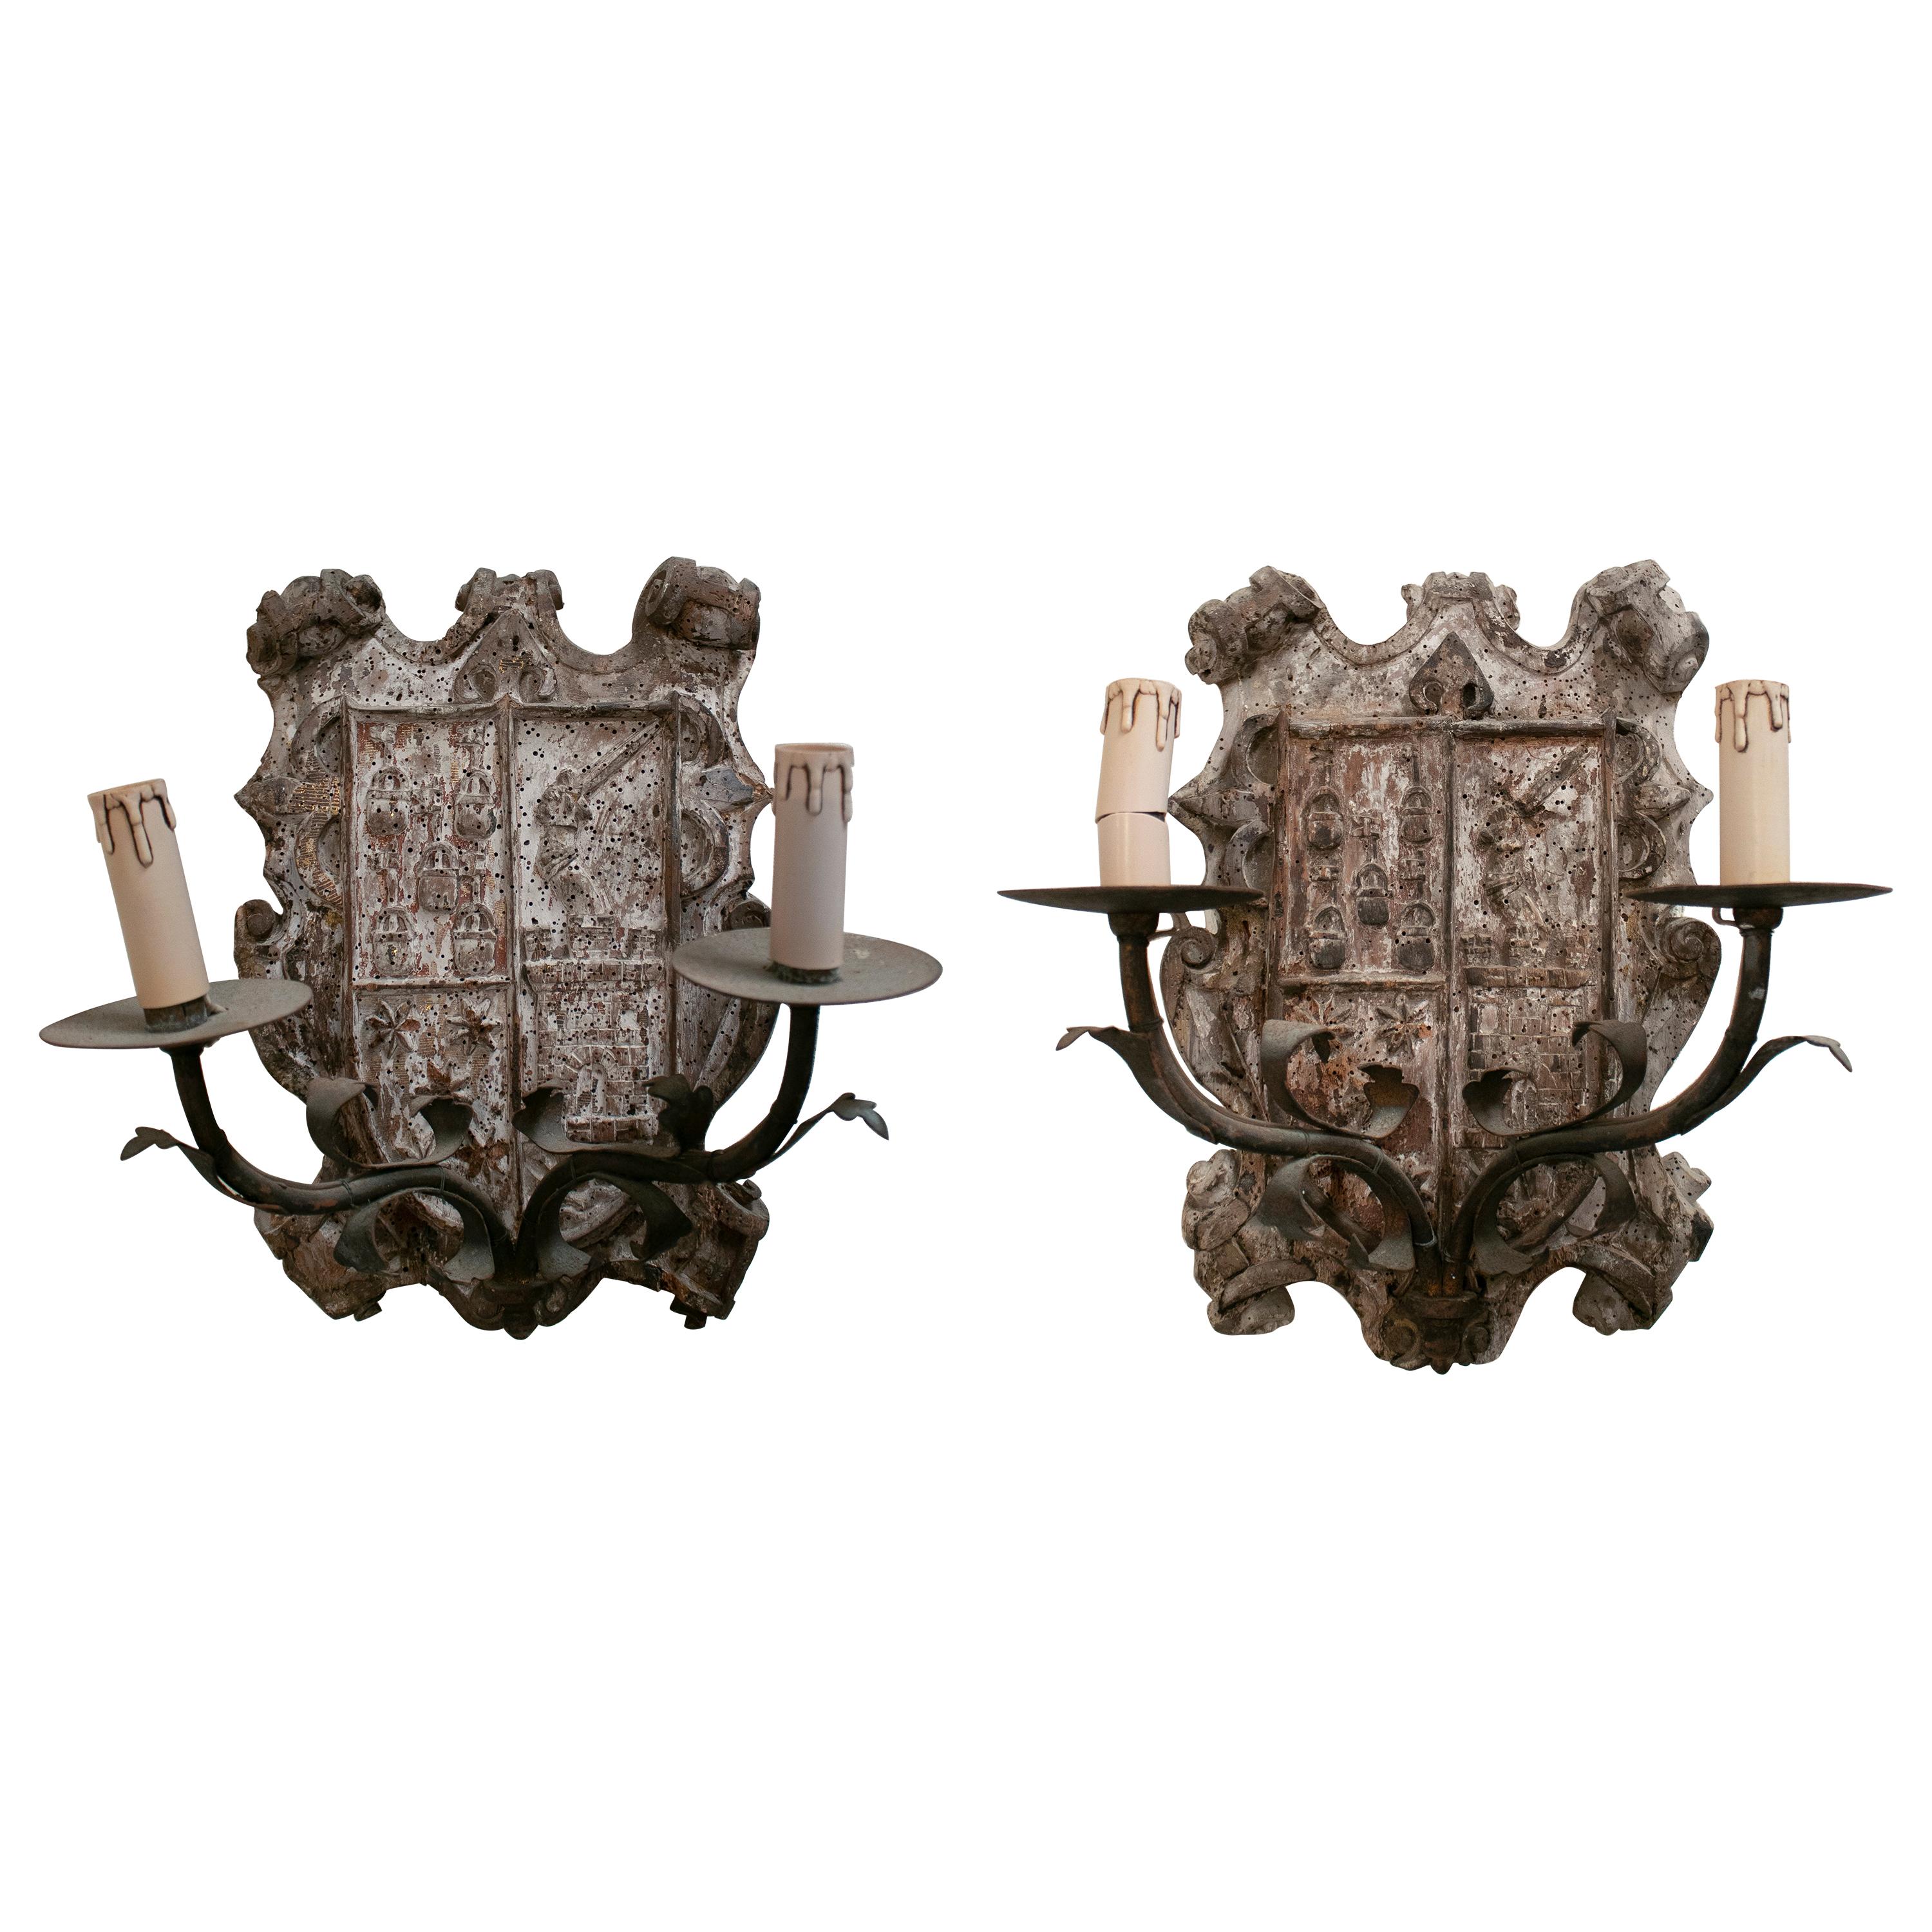 18th Century European Pair of Wood Crest Two-Arm Sconce Wall Lamps